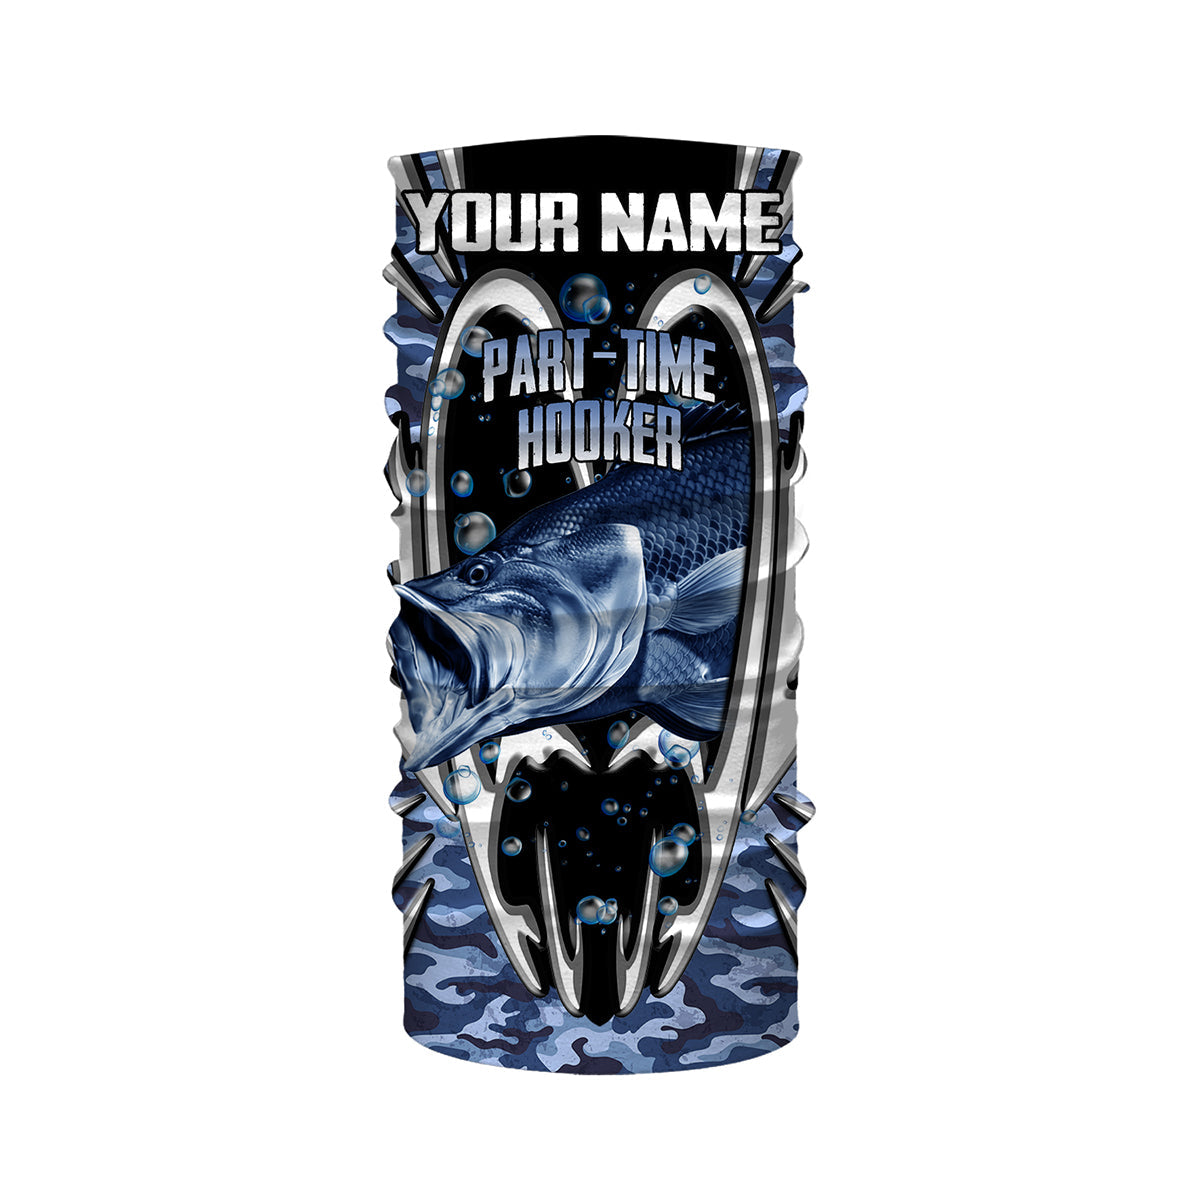 part-time-hooker-bass-fishing-blue-camo-fishing-shirts-for-men-performance-long-sleeve-uv-protection-quick-dry-customize-name-upf-30-fishing-neck-gaiters